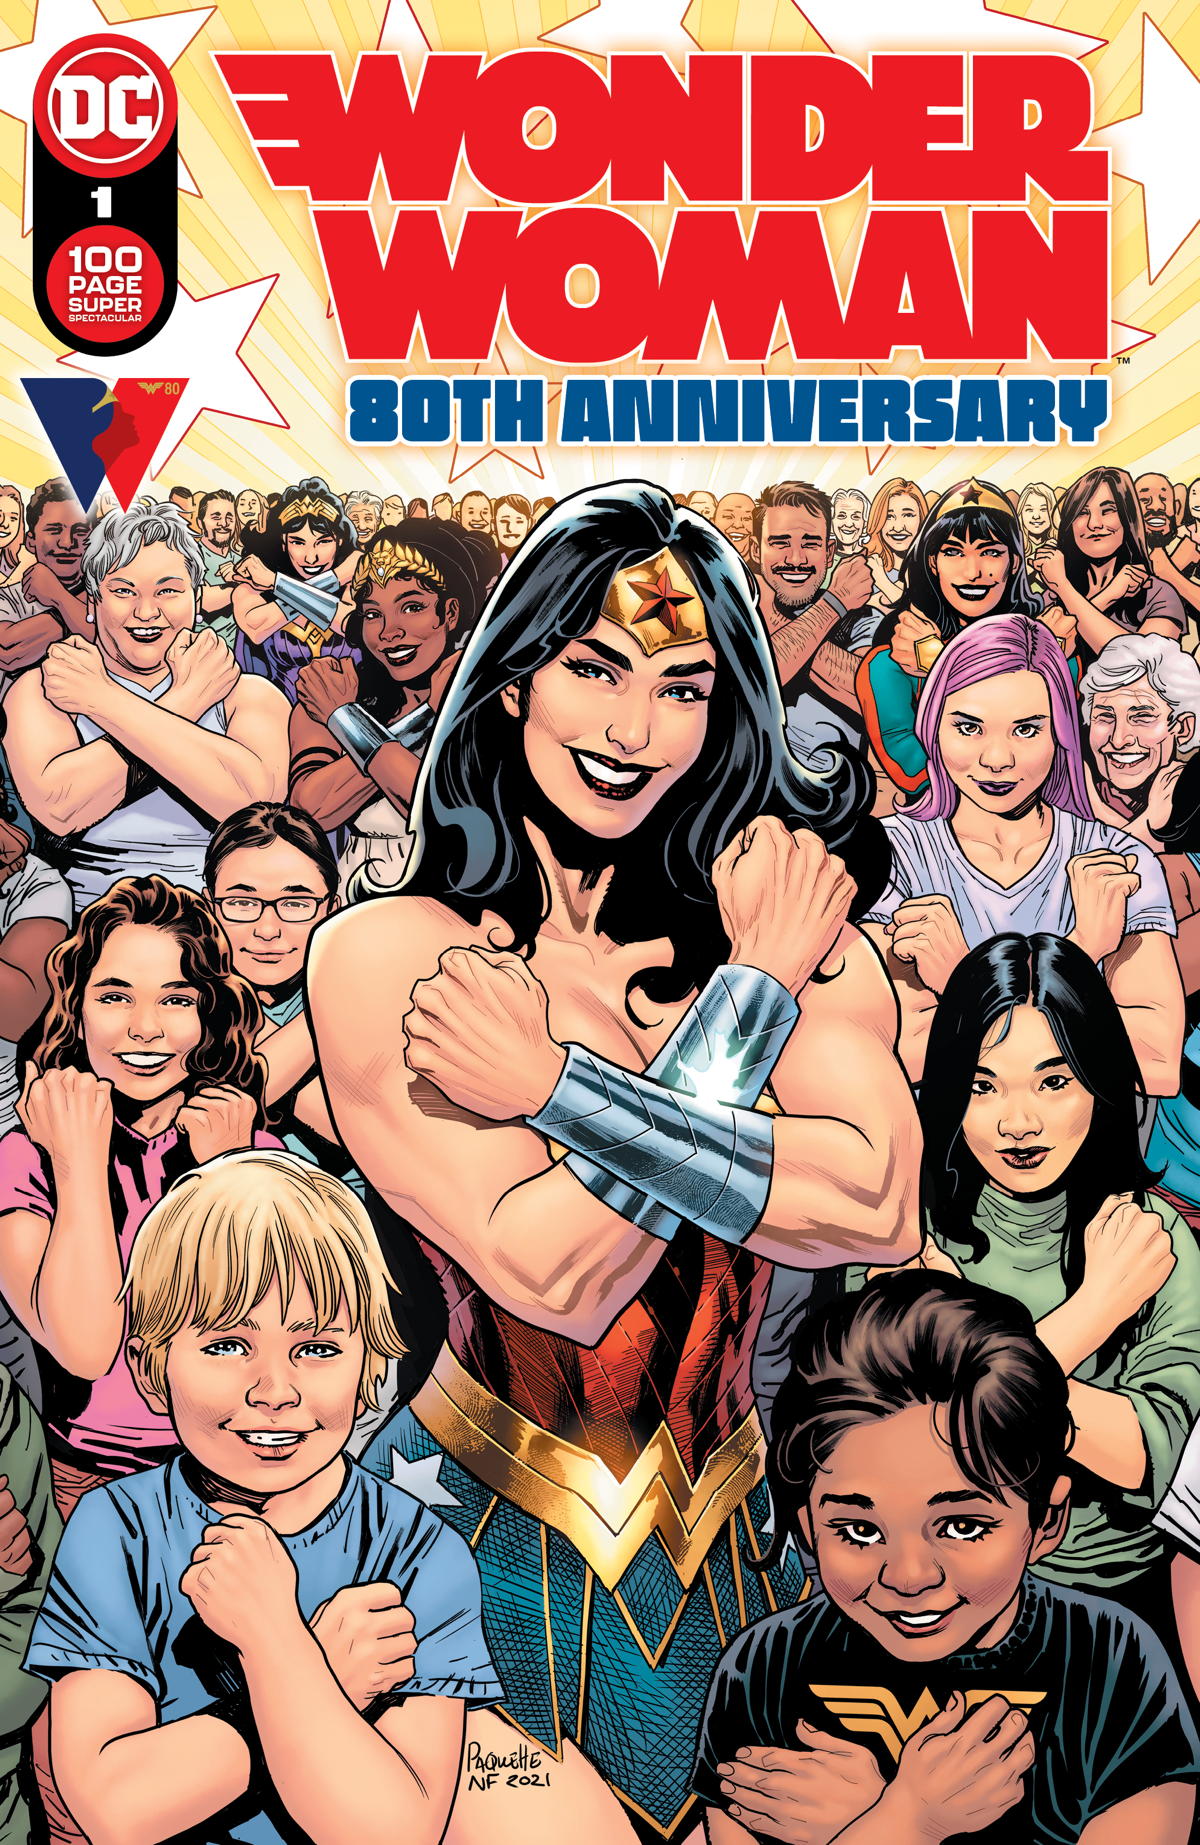 Wonder Woman 80th 100 Page Super Cover.jpg